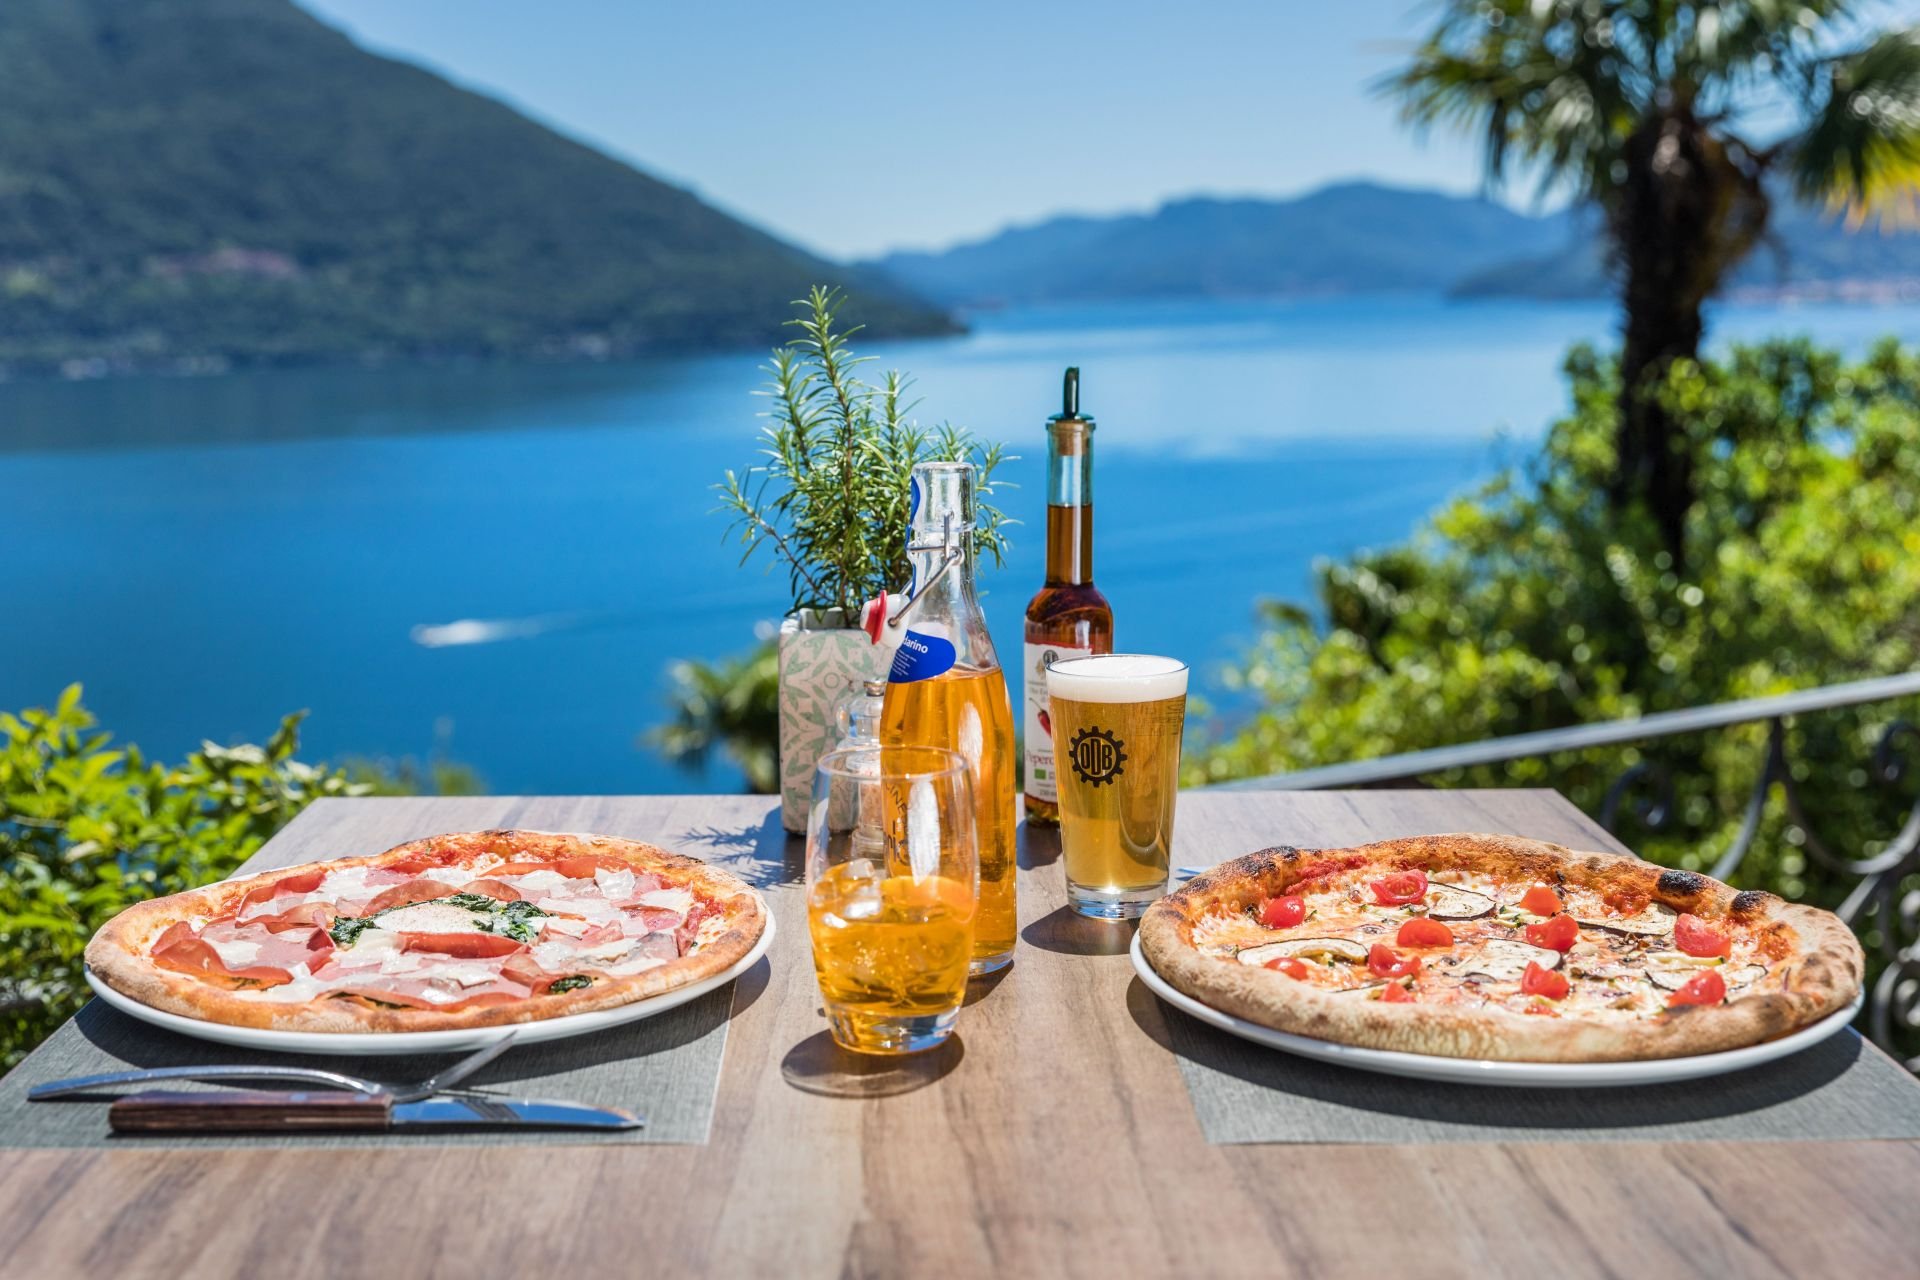 Pizza with a view